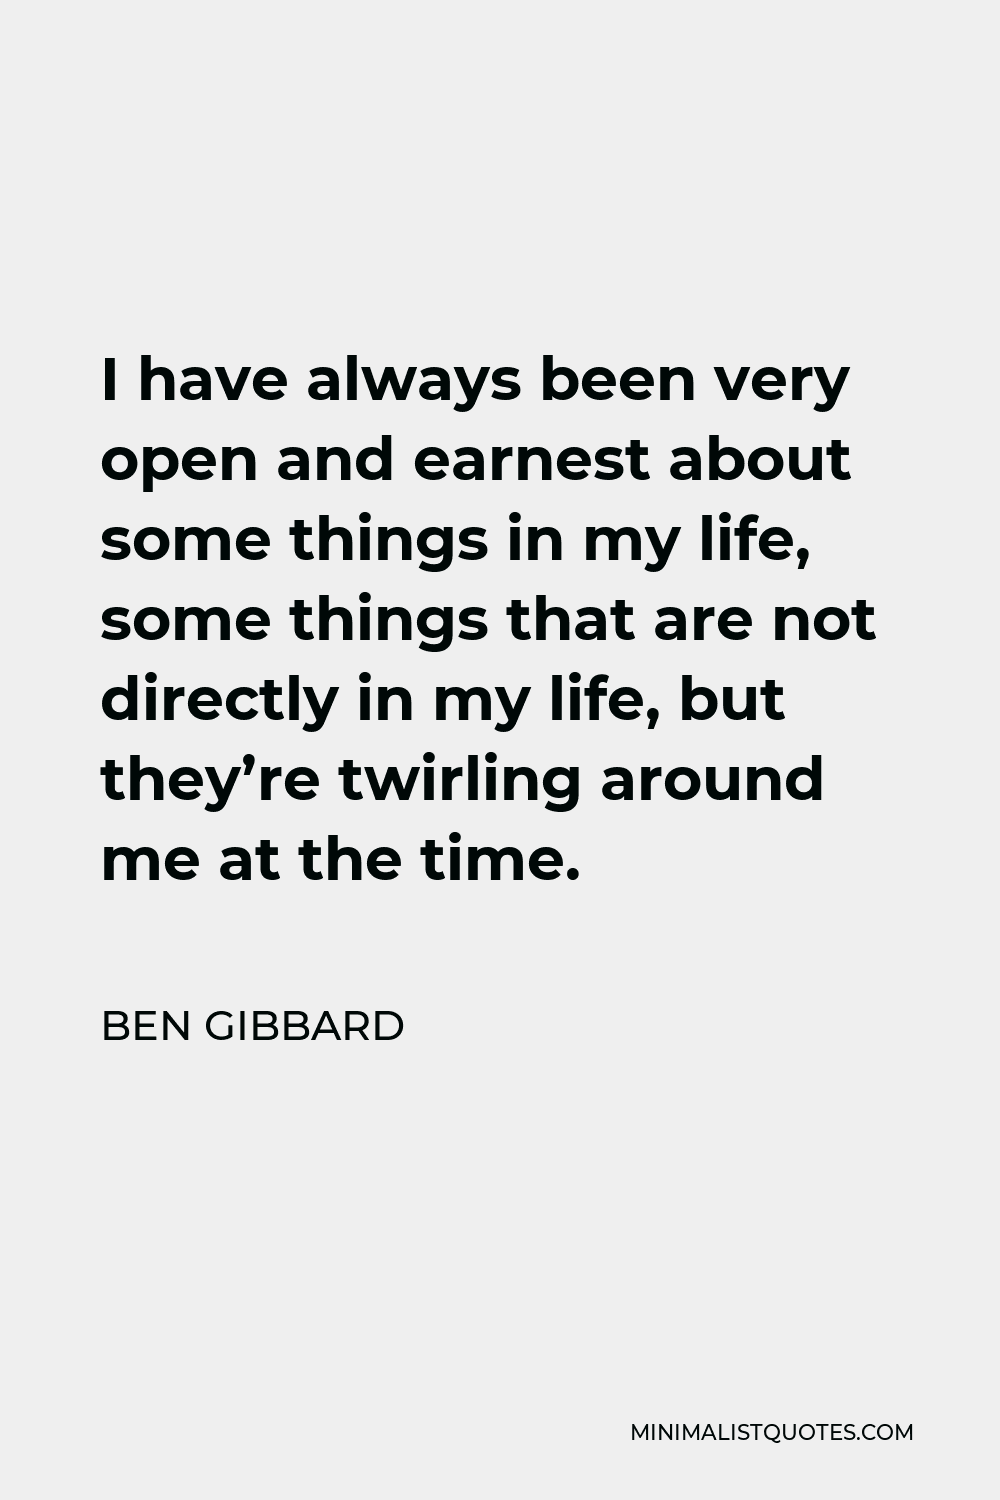 Ben Gibbard Quote - I have always been very open and earnest about some things in my life, some things that are not directly in my life, but they’re twirling around me at the time.